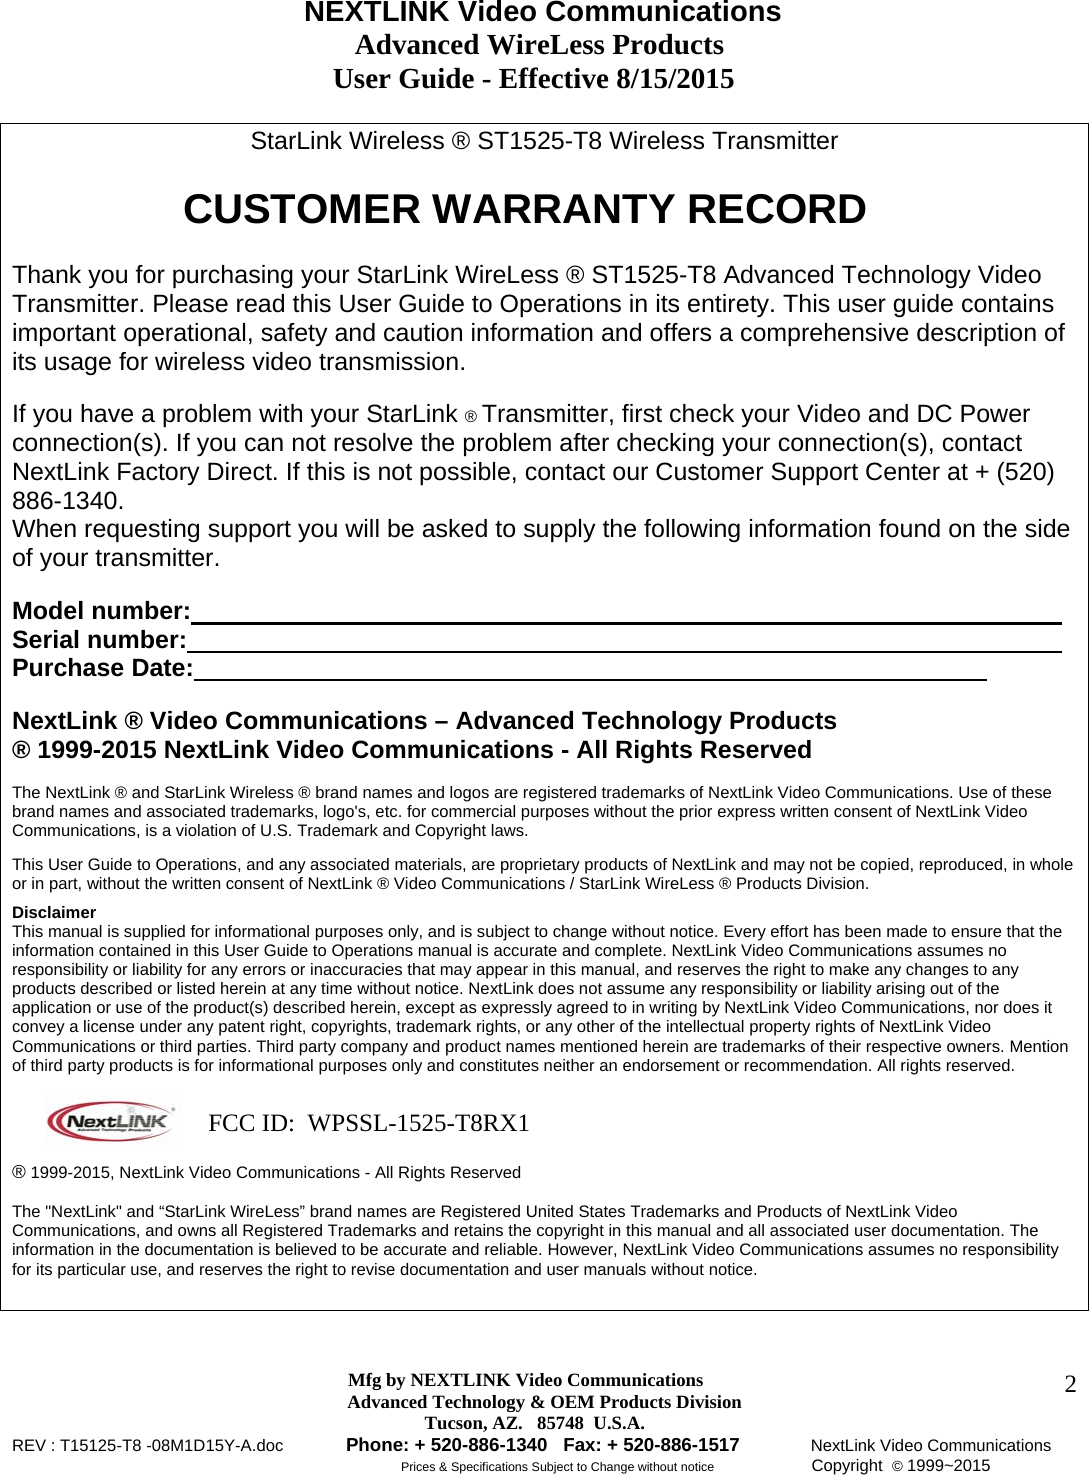                                     NEXTLINK Video Communications                                                 Advanced WireLess Products                                               User Guide - Effective 8/15/2015  Mfg by NEXTLINK Video Communications Advanced Technology &amp; OEM Products Division         Tucson, AZ.   85748  U.S.A. REV : T15125-T8 -08M1D15Y-A.doc         Phone: + 520-886-1340   Fax: + 520-886-1517          NextLink Video Communications                                                         Prices &amp; Specifications Subject to Change without notice              Copyright  © 1999~2015      2StarLink Wireless ® ST1525-T8 Wireless Transmitter        CUSTOMER WARRANTY RECORD   Thank you for purchasing your StarLink WireLess ® ST1525-T8 Advanced Technology Video Transmitter. Please read this User Guide to Operations in its entirety. This user guide contains important operational, safety and caution information and offers a comprehensive description of its usage for wireless video transmission.  If you have a problem with your StarLink ® Transmitter, first check your Video and DC Power connection(s). If you can not resolve the problem after checking your connection(s), contact  NextLink Factory Direct. If this is not possible, contact our Customer Support Center at + (520) 886-1340.  When requesting support you will be asked to supply the following information found on the side of your transmitter.   Model number:             Serial number:             Purchase Date:             NextLink ® Video Communications – Advanced Technology Products  ® 1999-2015 NextLink Video Communications - All Rights Reserved  The NextLink ® and StarLink Wireless ® brand names and logos are registered trademarks of NextLink Video Communications. Use of these brand names and associated trademarks, logo&apos;s, etc. for commercial purposes without the prior express written consent of NextLink Video Communications, is a violation of U.S. Trademark and Copyright laws.  This User Guide to Operations, and any associated materials, are proprietary products of NextLink and may not be copied, reproduced, in whole or in part, without the written consent of NextLink ® Video Communications / StarLink WireLess ® Products Division.   Disclaimer  This manual is supplied for informational purposes only, and is subject to change without notice. Every effort has been made to ensure that the information contained in this User Guide to Operations manual is accurate and complete. NextLink Video Communications assumes no responsibility or liability for any errors or inaccuracies that may appear in this manual, and reserves the right to make any changes to any products described or listed herein at any time without notice. NextLink does not assume any responsibility or liability arising out of the application or use of the product(s) described herein, except as expressly agreed to in writing by NextLink Video Communications, nor does it convey a license under any patent right, copyrights, trademark rights, or any other of the intellectual property rights of NextLink Video Communications or third parties. Third party company and product names mentioned herein are trademarks of their respective owners. Mention of third party products is for informational purposes only and constitutes neither an endorsement or recommendation. All rights reserved.    ® 1999-2015, NextLink Video Communications - All Rights Reserved  The &quot;NextLink&quot; and “StarLink WireLess” brand names are Registered United States Trademarks and Products of NextLink Video Communications, and owns all Registered Trademarks and retains the copyright in this manual and all associated user documentation. The information in the documentation is believed to be accurate and reliable. However, NextLink Video Communications assumes no responsibility for its particular use, and reserves the right to revise documentation and user manuals without notice.      FCC ID:  WPSSL-1525-T8RX1 